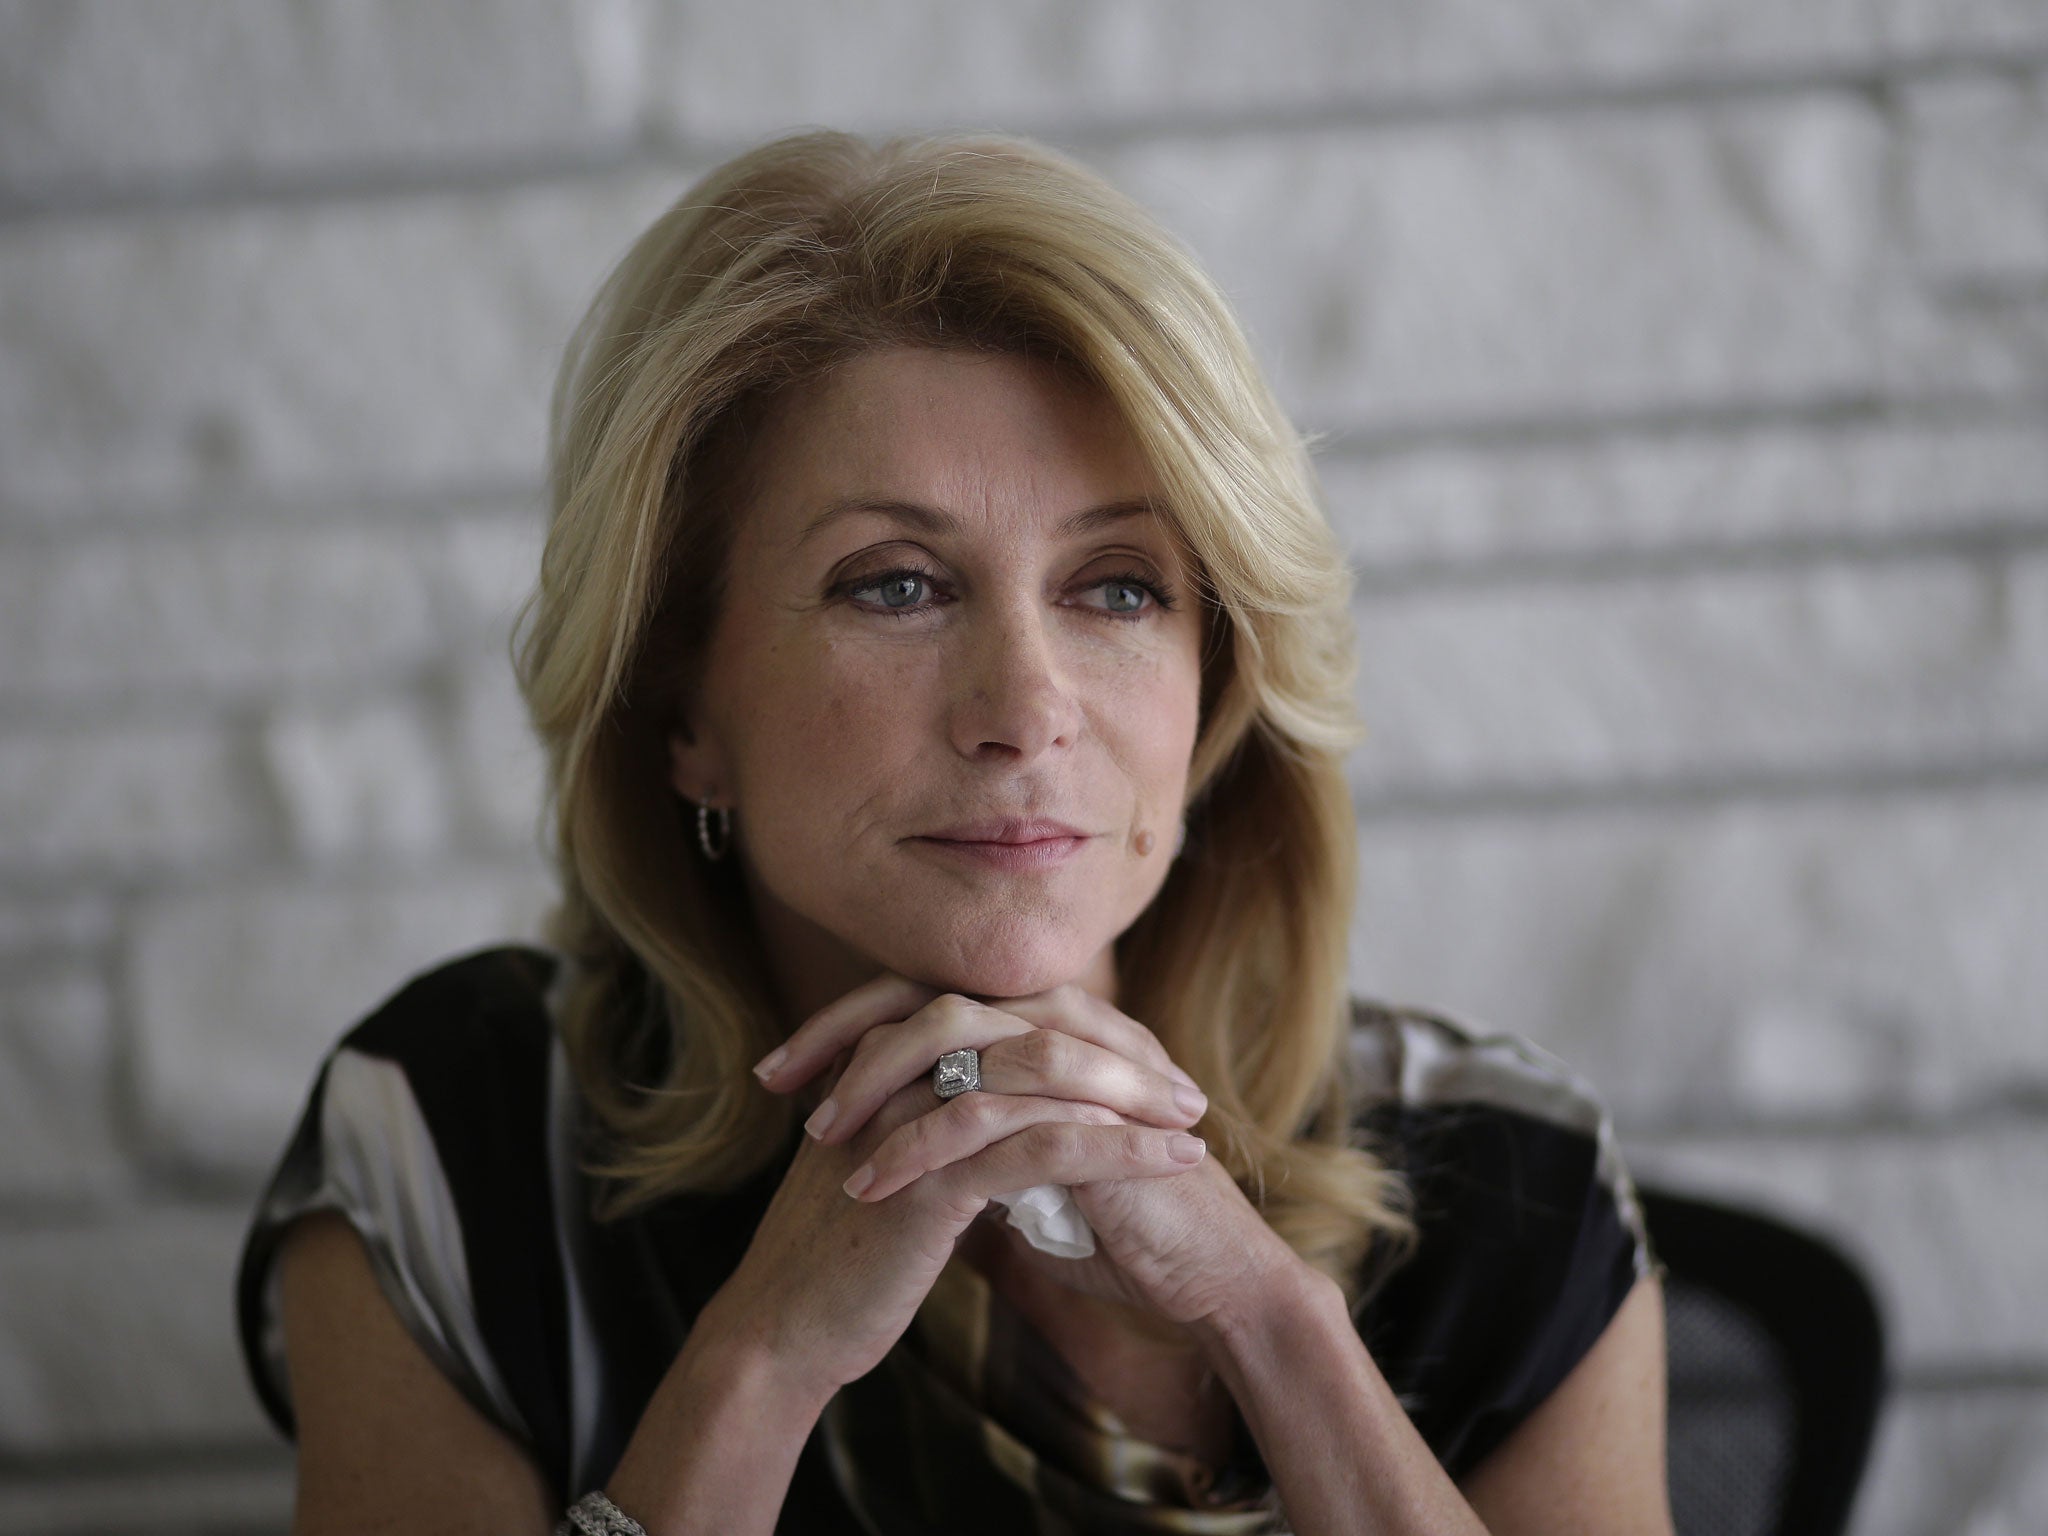 Wendy Davis's campaign had made much use of her life story, and Republicans have jumped on the alleged discrepancies